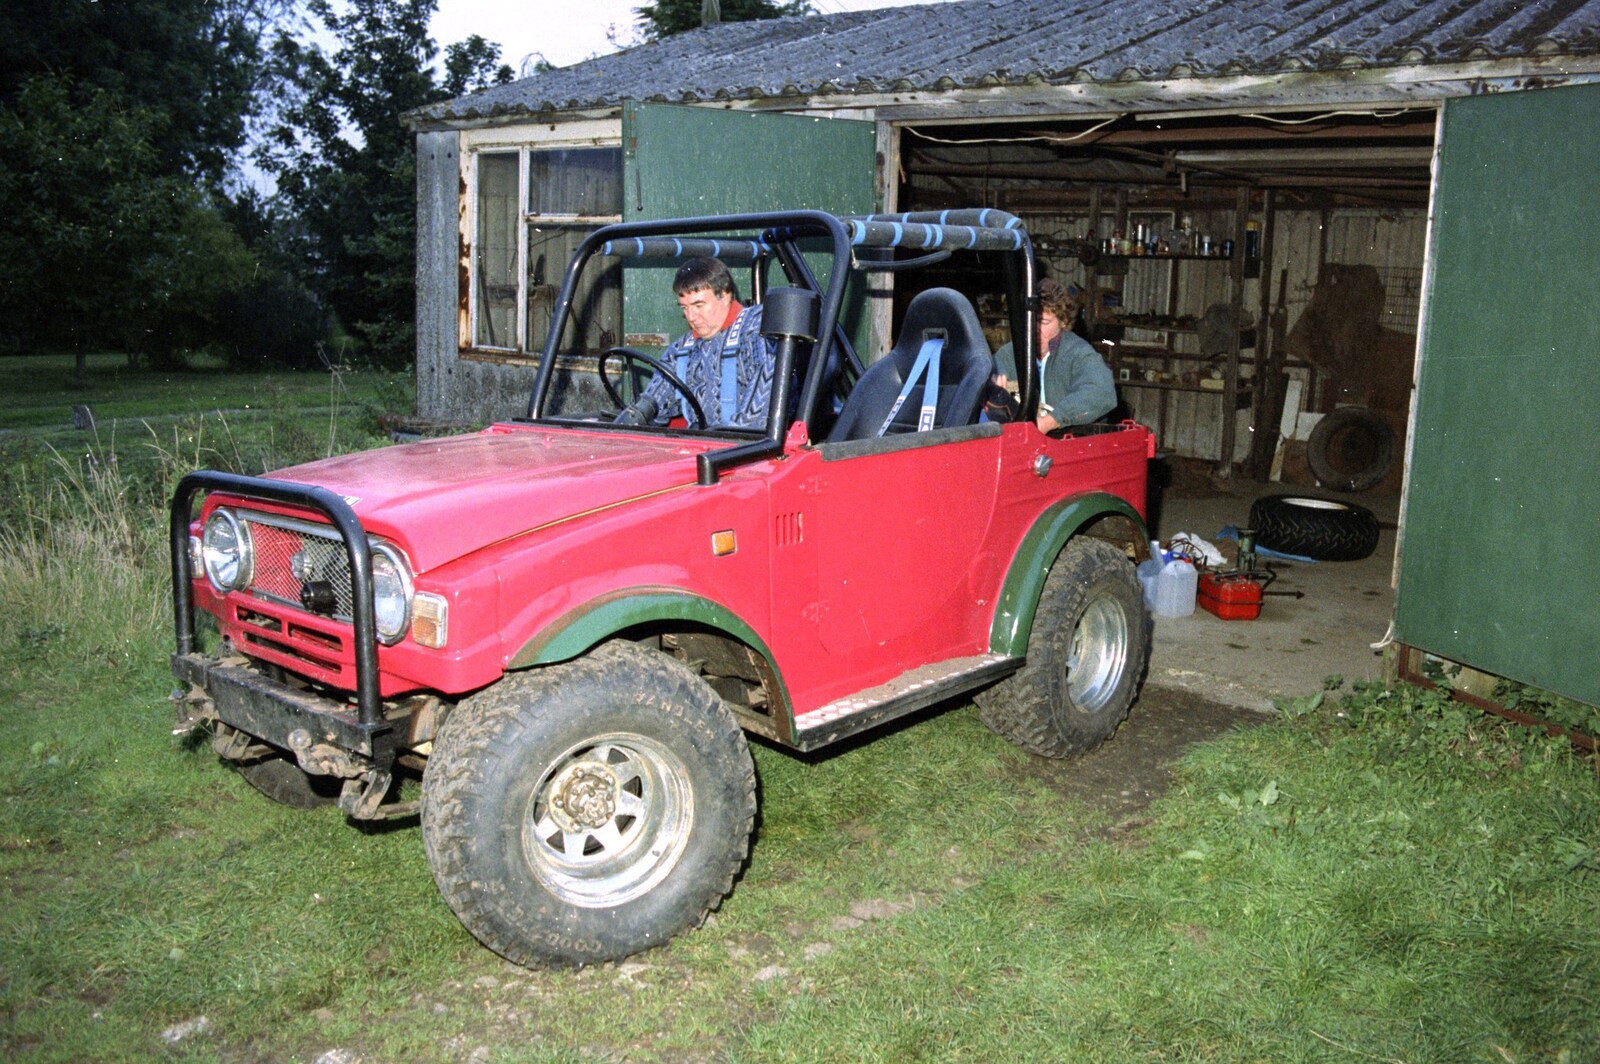 Corky drives the Daihatsu out of the garage from Off-roading with Geoff and Brenda, Stuston and Elsewhere, Suffolk - 15th September 1995